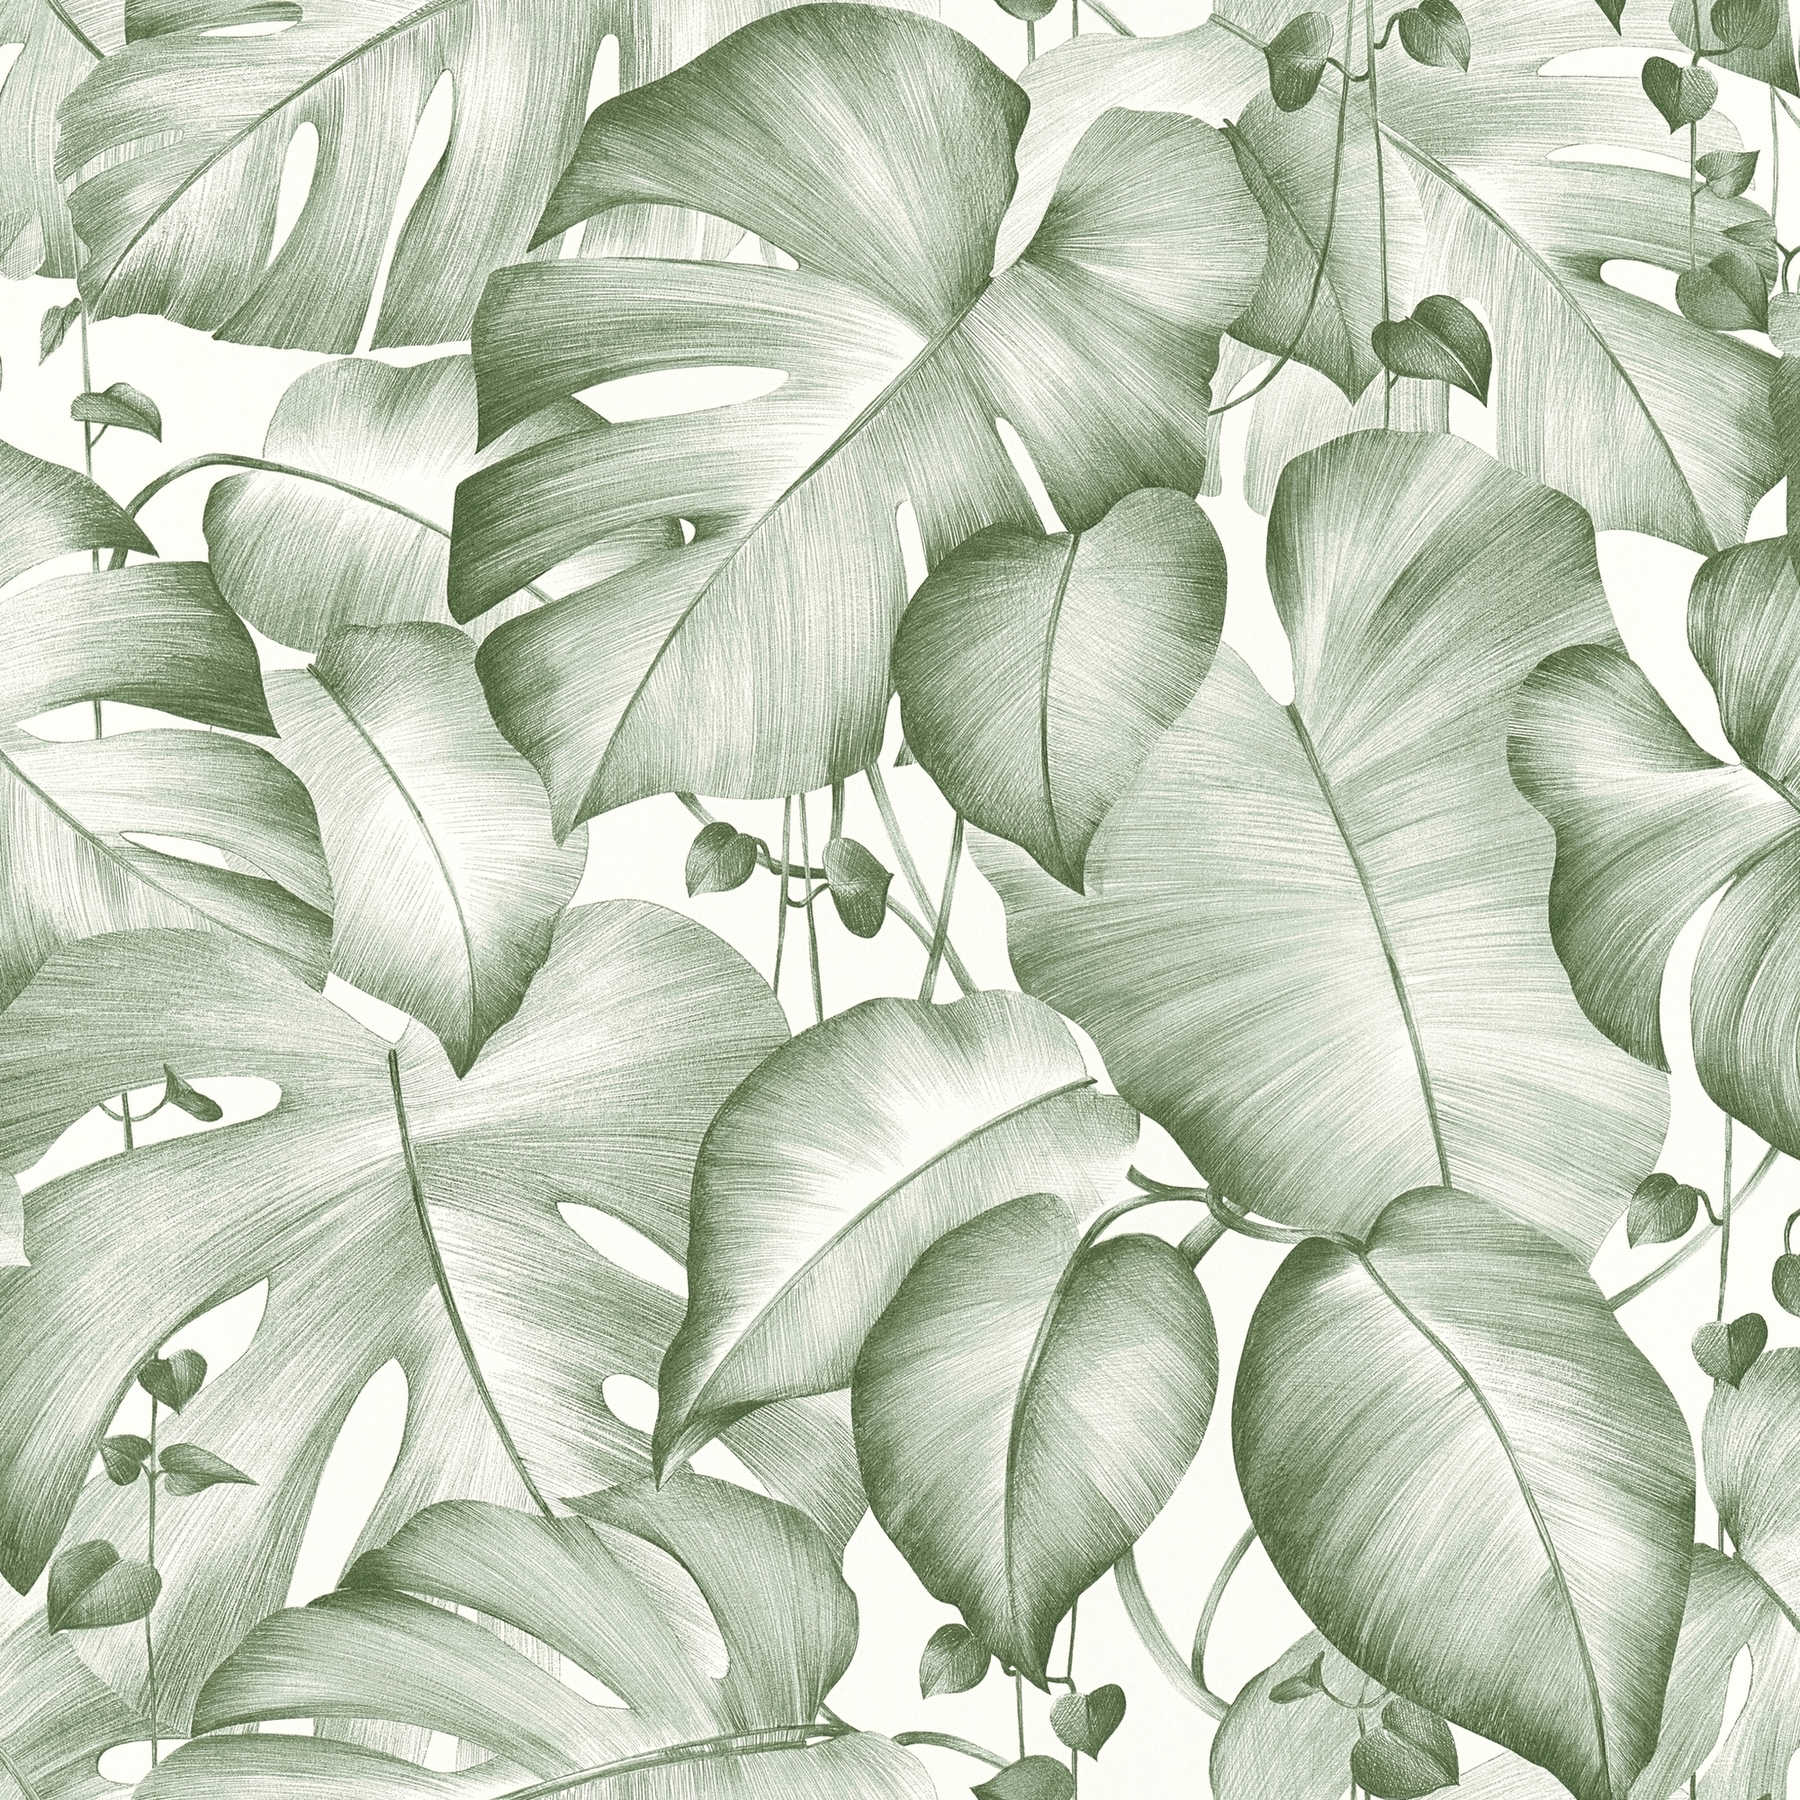             Design panel self-adhesive with Monstera leaves - Green, White
        